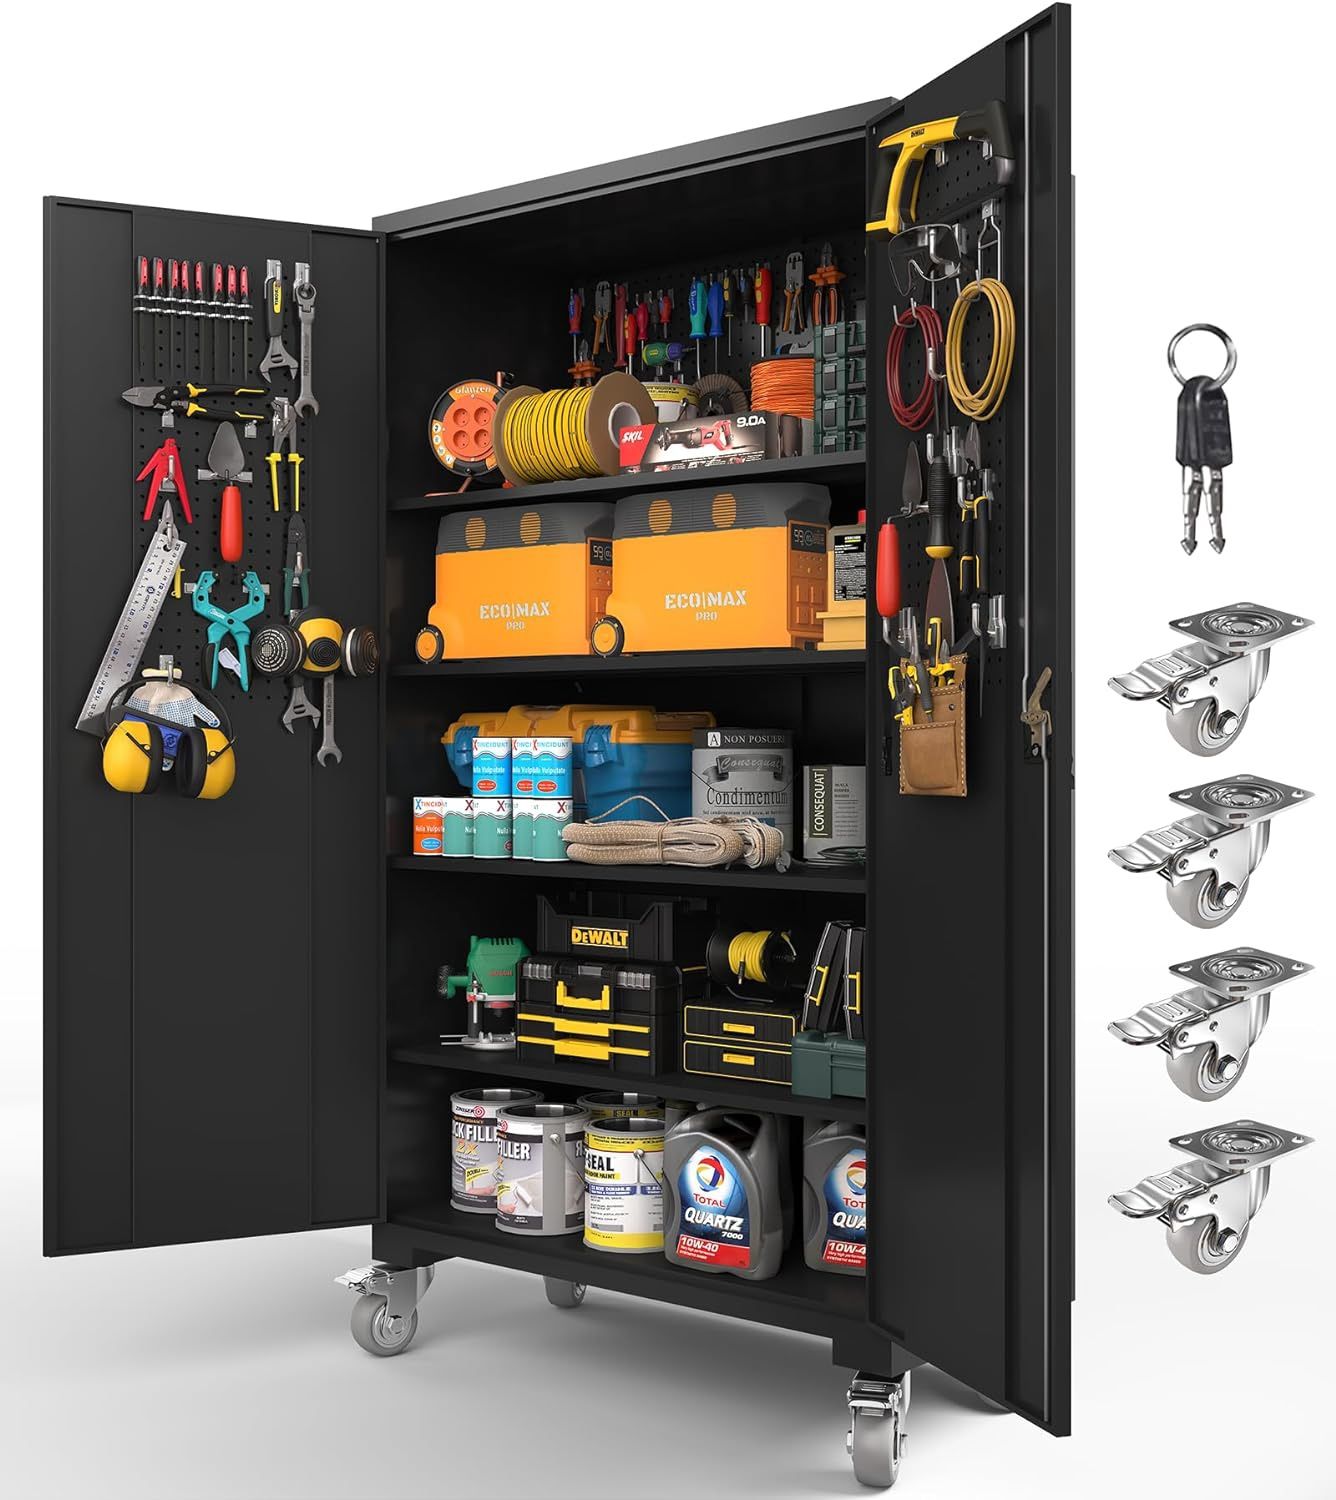 Tall & Wide Metal Storage Cabinet with Doors & 4 Adjustable Shelves | Heavy-Duty Black Lockable Garage Cabinet with Wheels & Pegboard for Office, Gym,